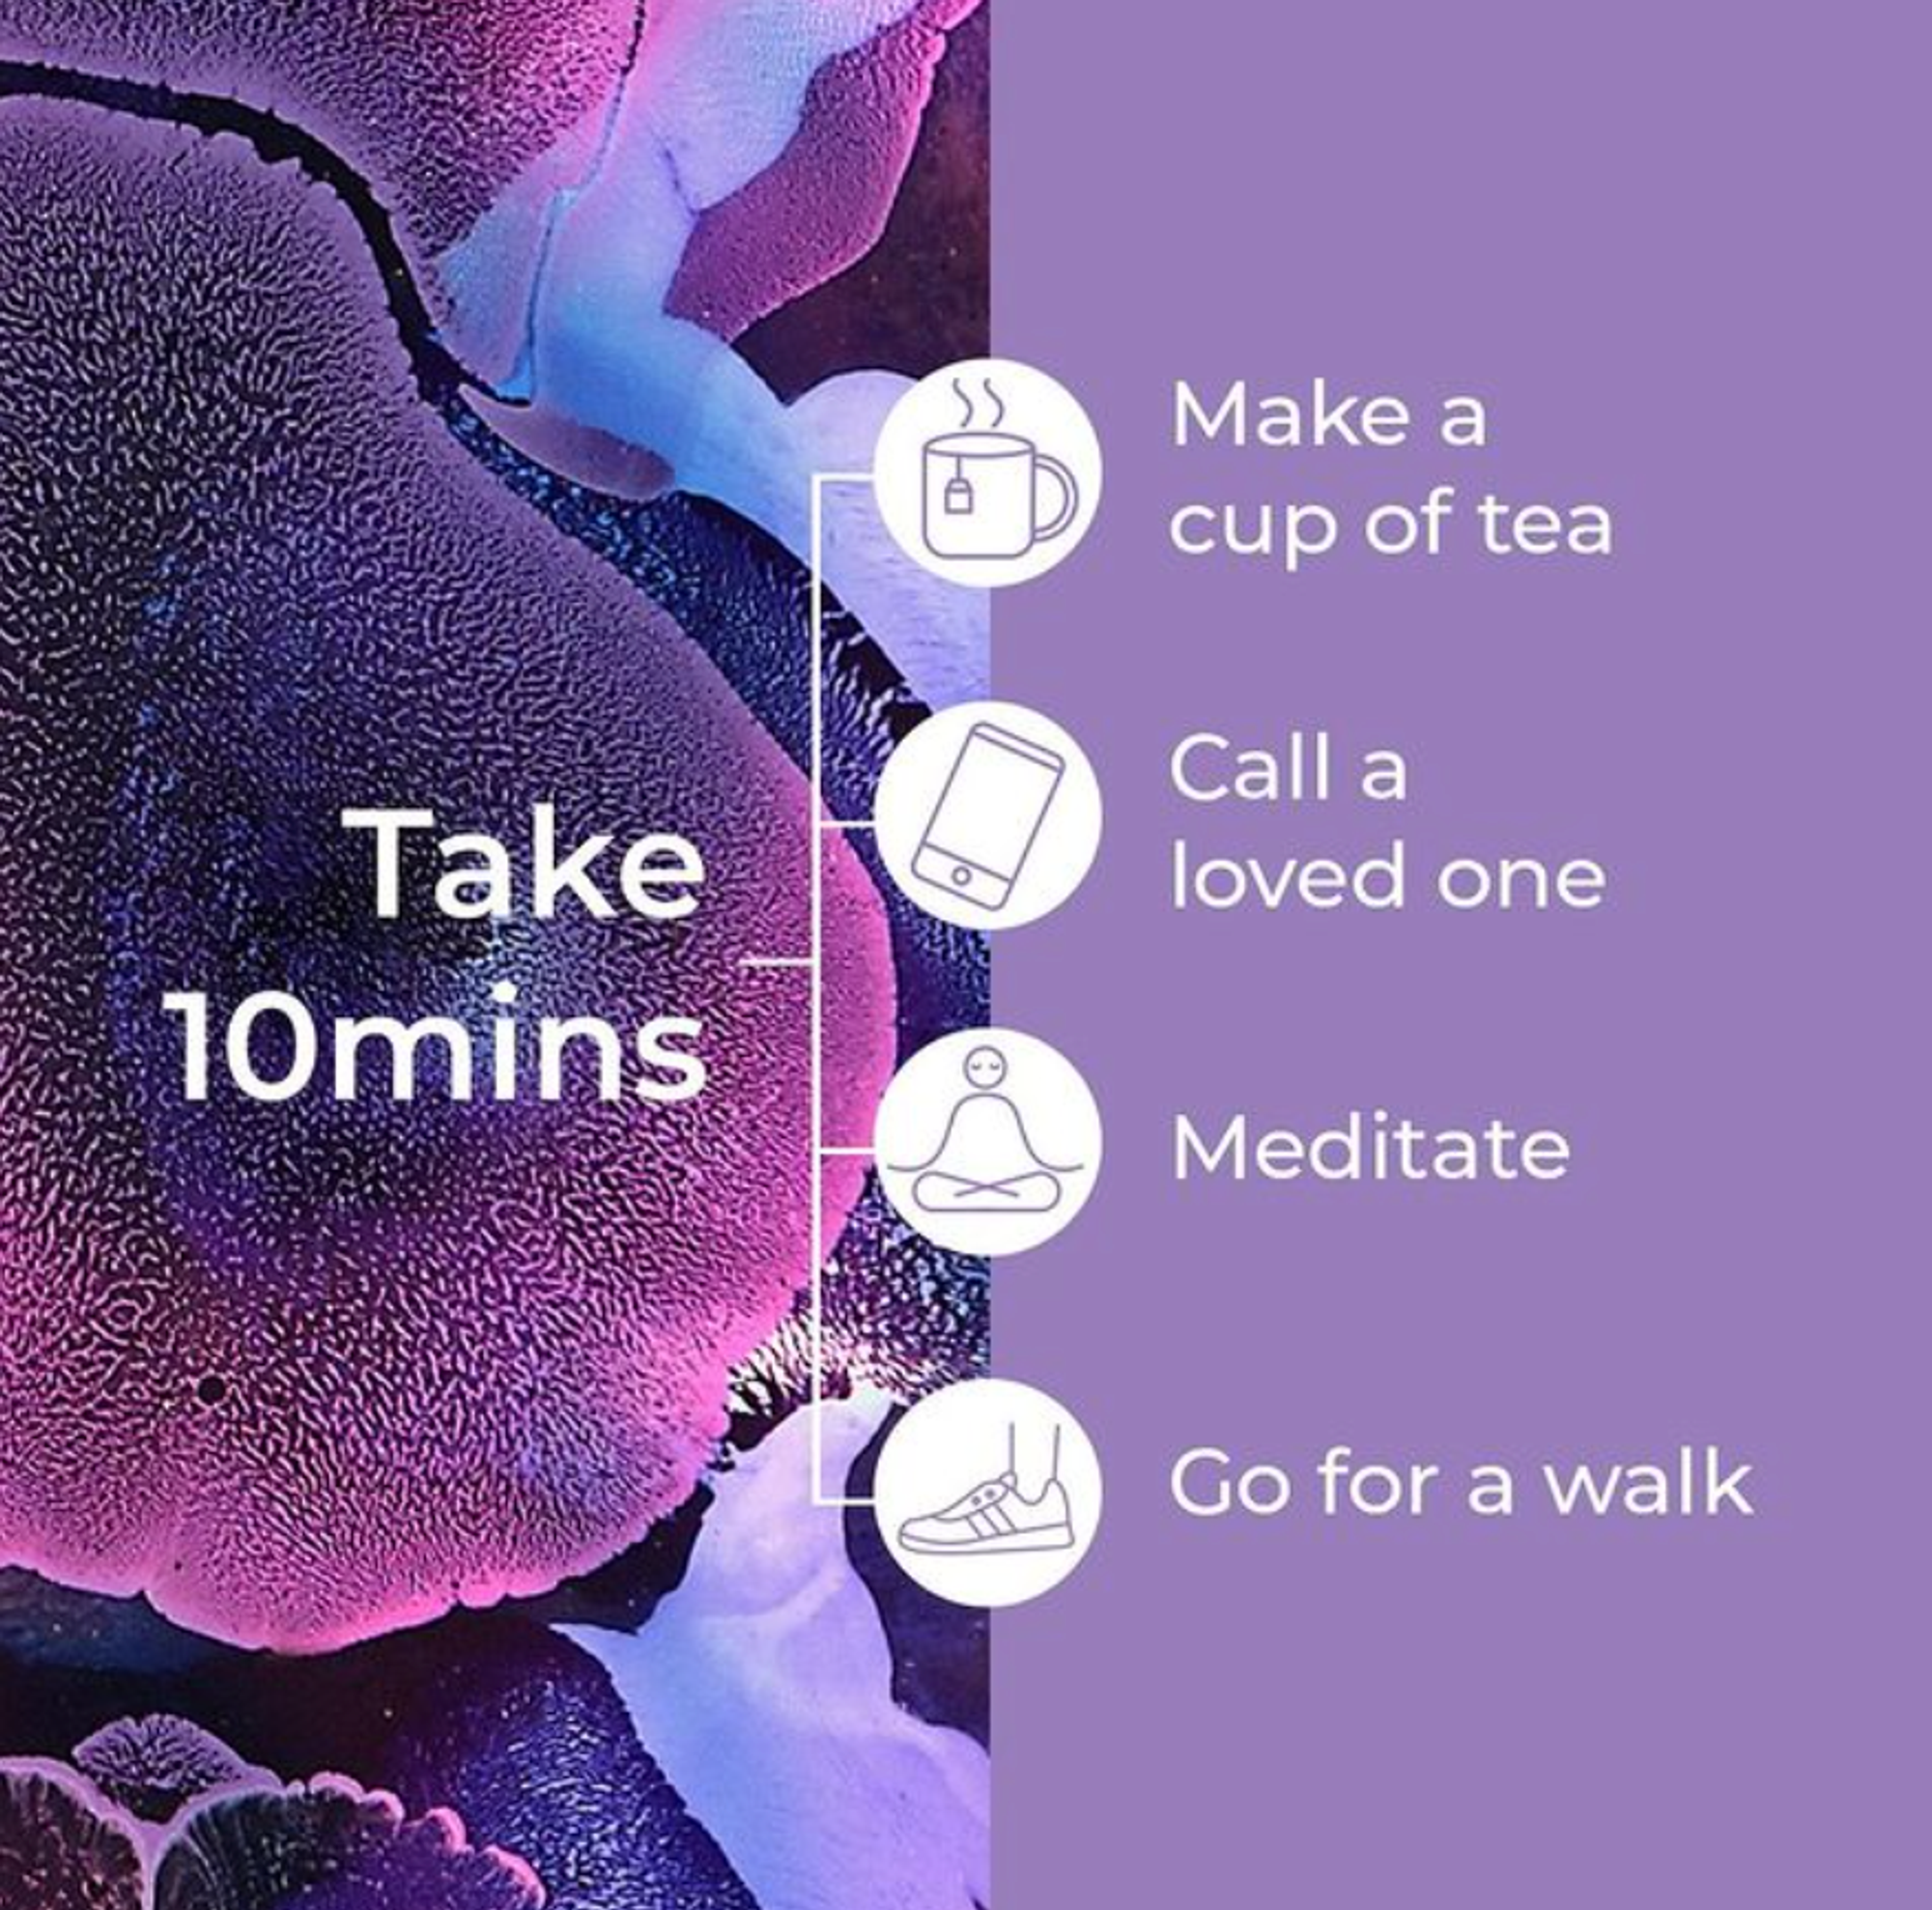 Figure 13: A new Instagram post from PrecisionBiotics. It has a funky looking purple pattern beside a strip of Zenflore’s brand purple colour. It says “Take 10 mins - make a cup of tea, call a loved one, meditate, go for a walk.”